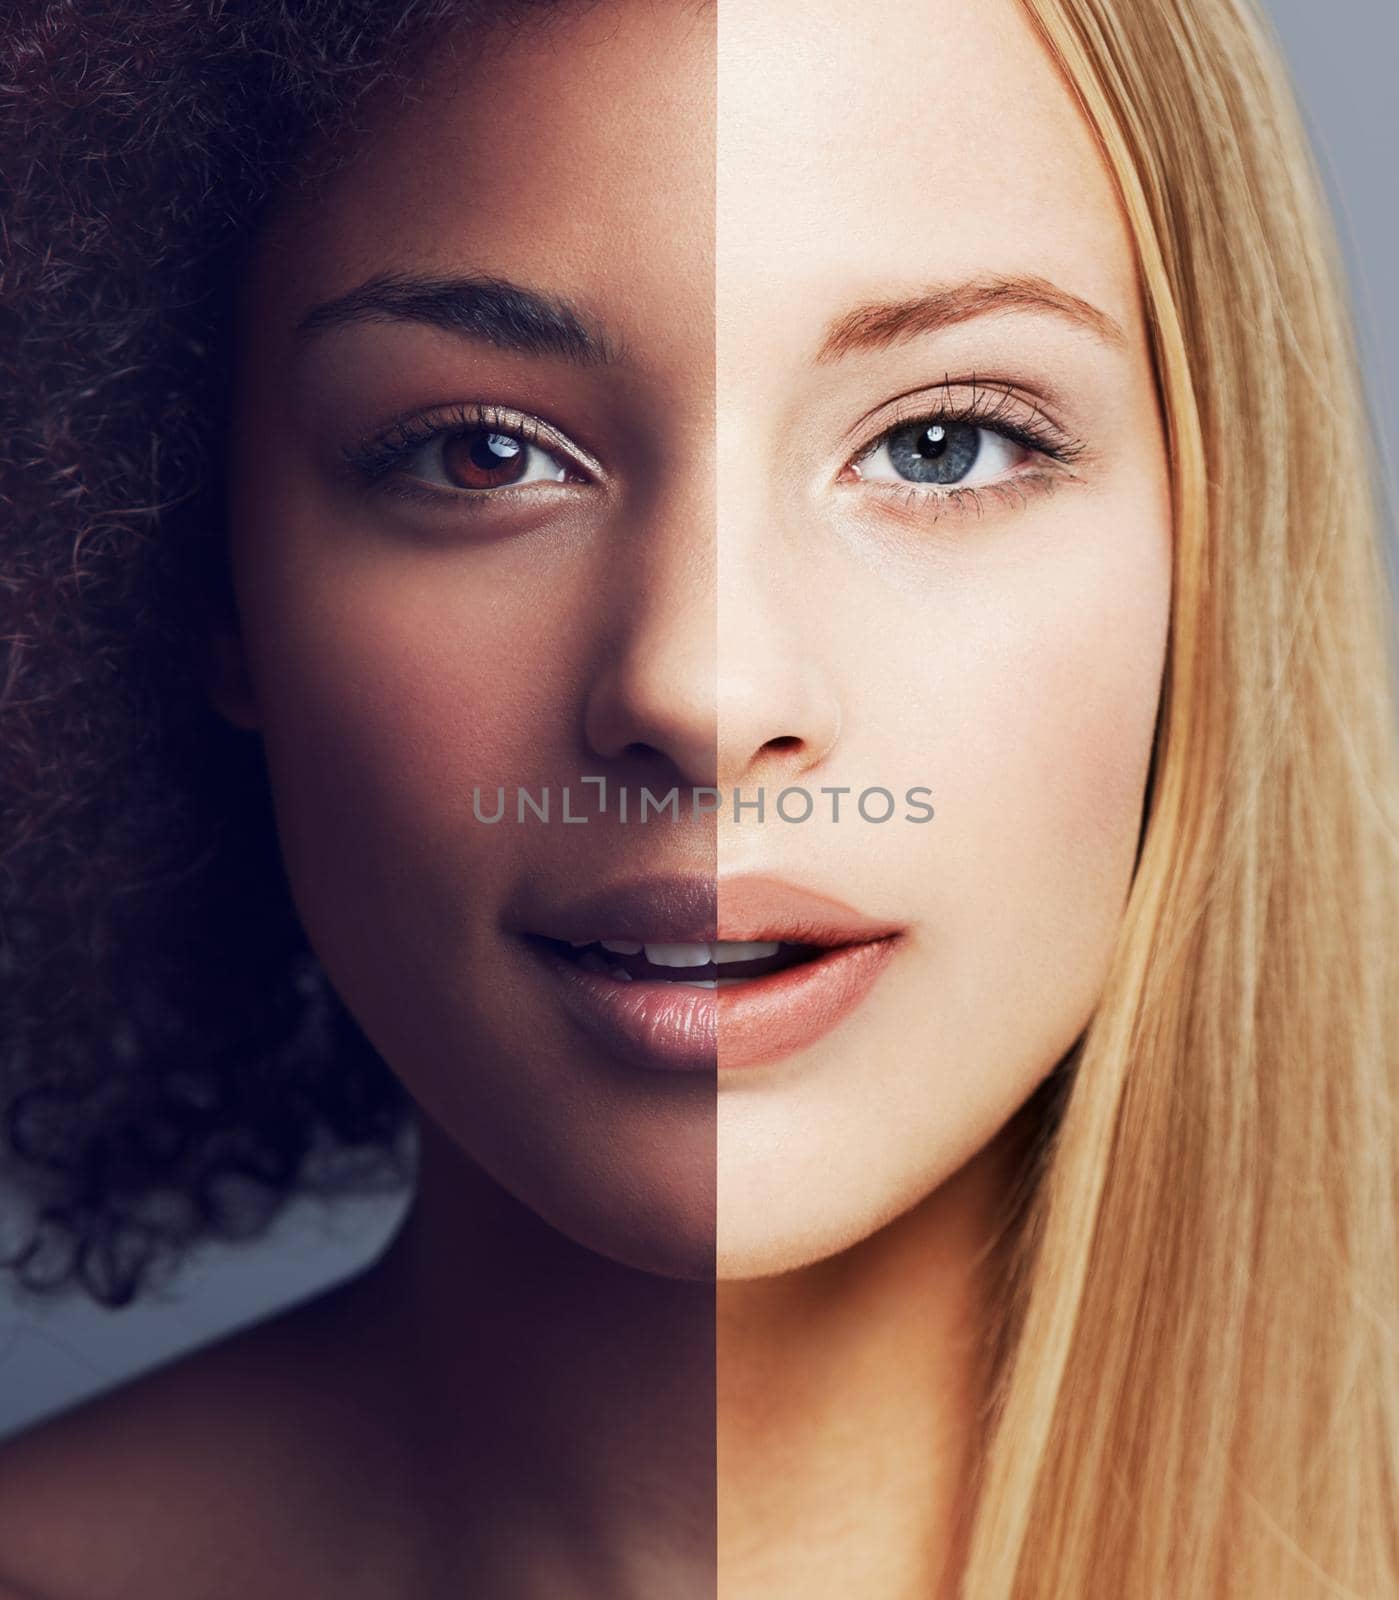 Conceptual portrait of the combined face of an african american woman and a caucasian woman